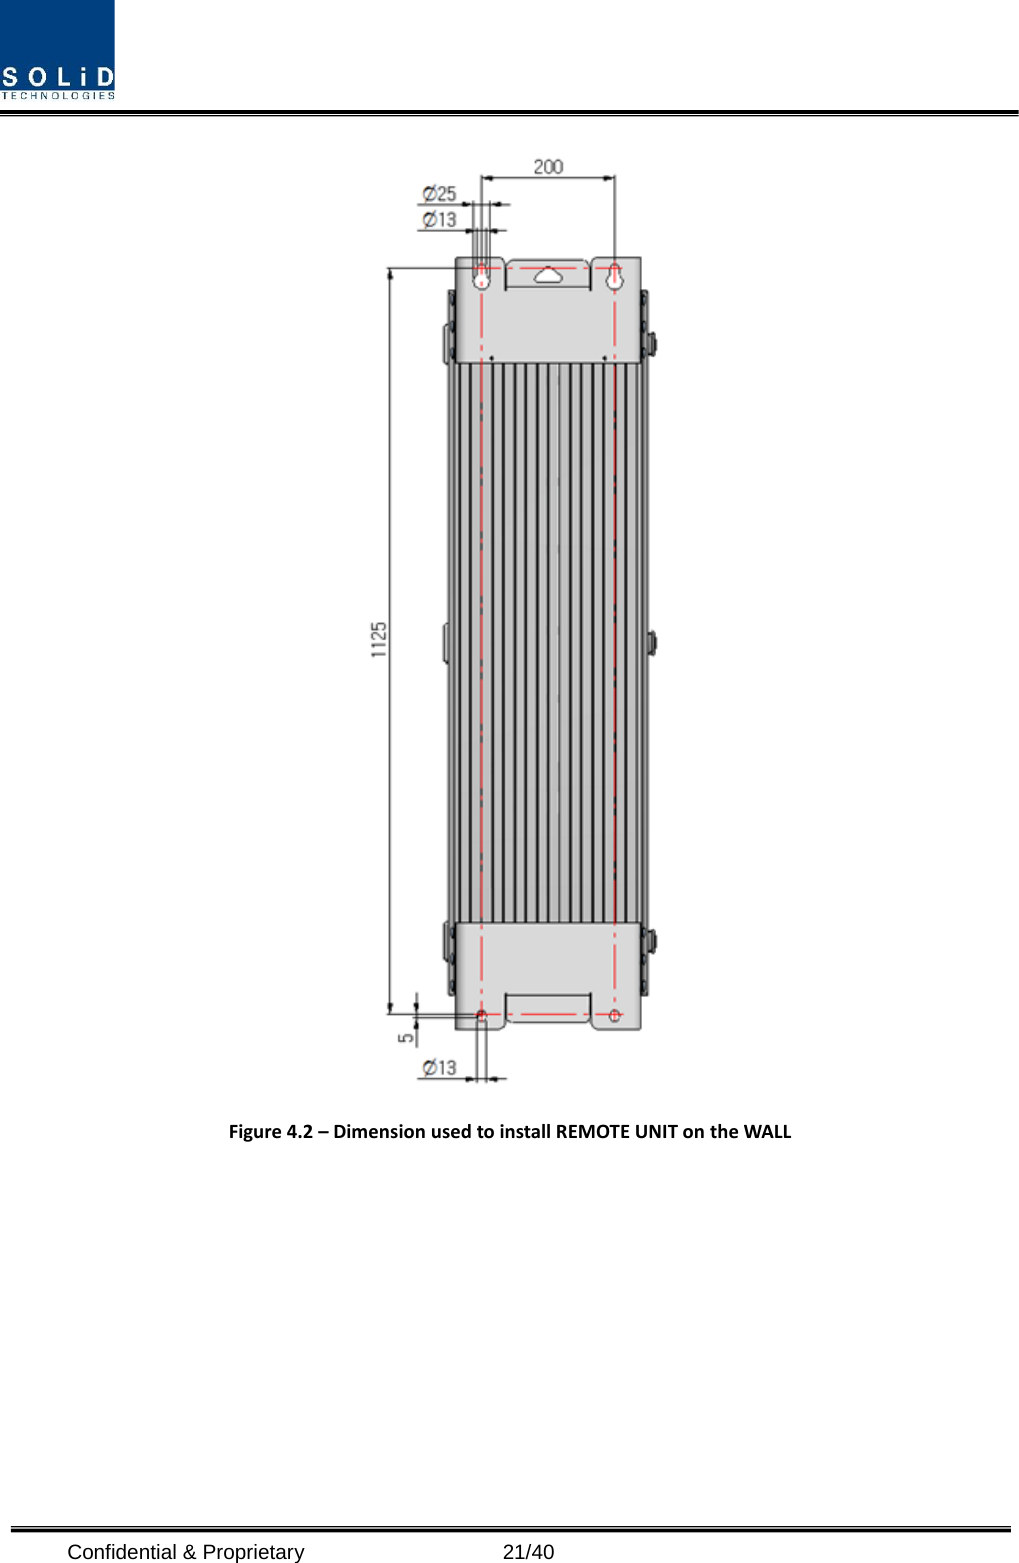  Confidential &amp; Proprietary                   21/40  Figure 4.2 – Dimension used to install REMOTE UNIT on the WALL       